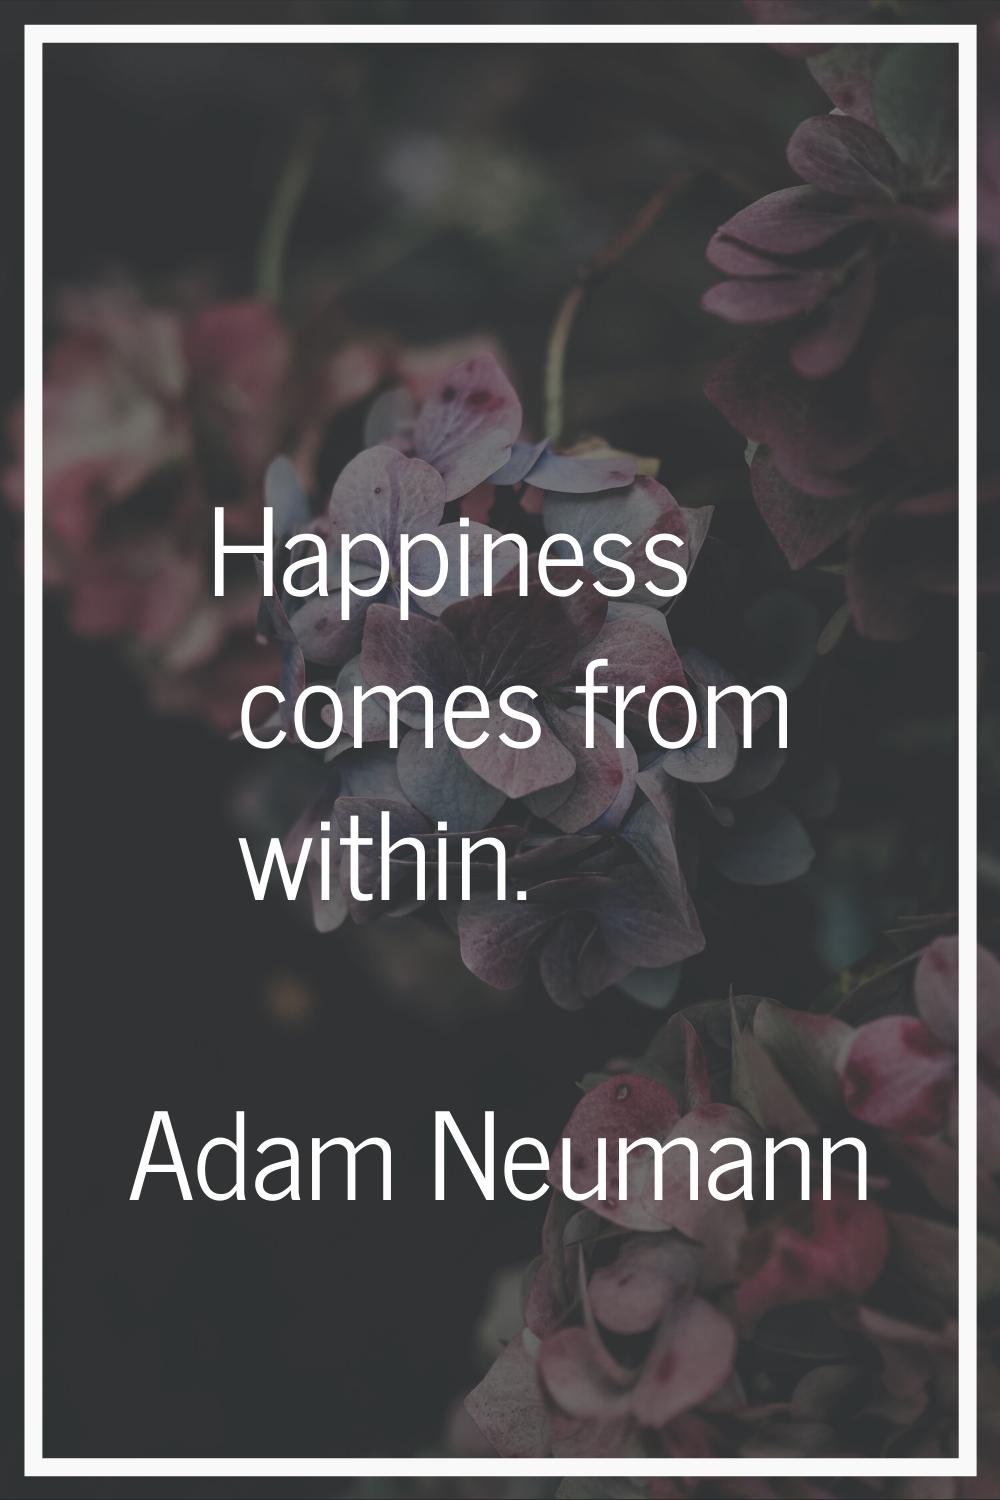 Happiness comes from within.